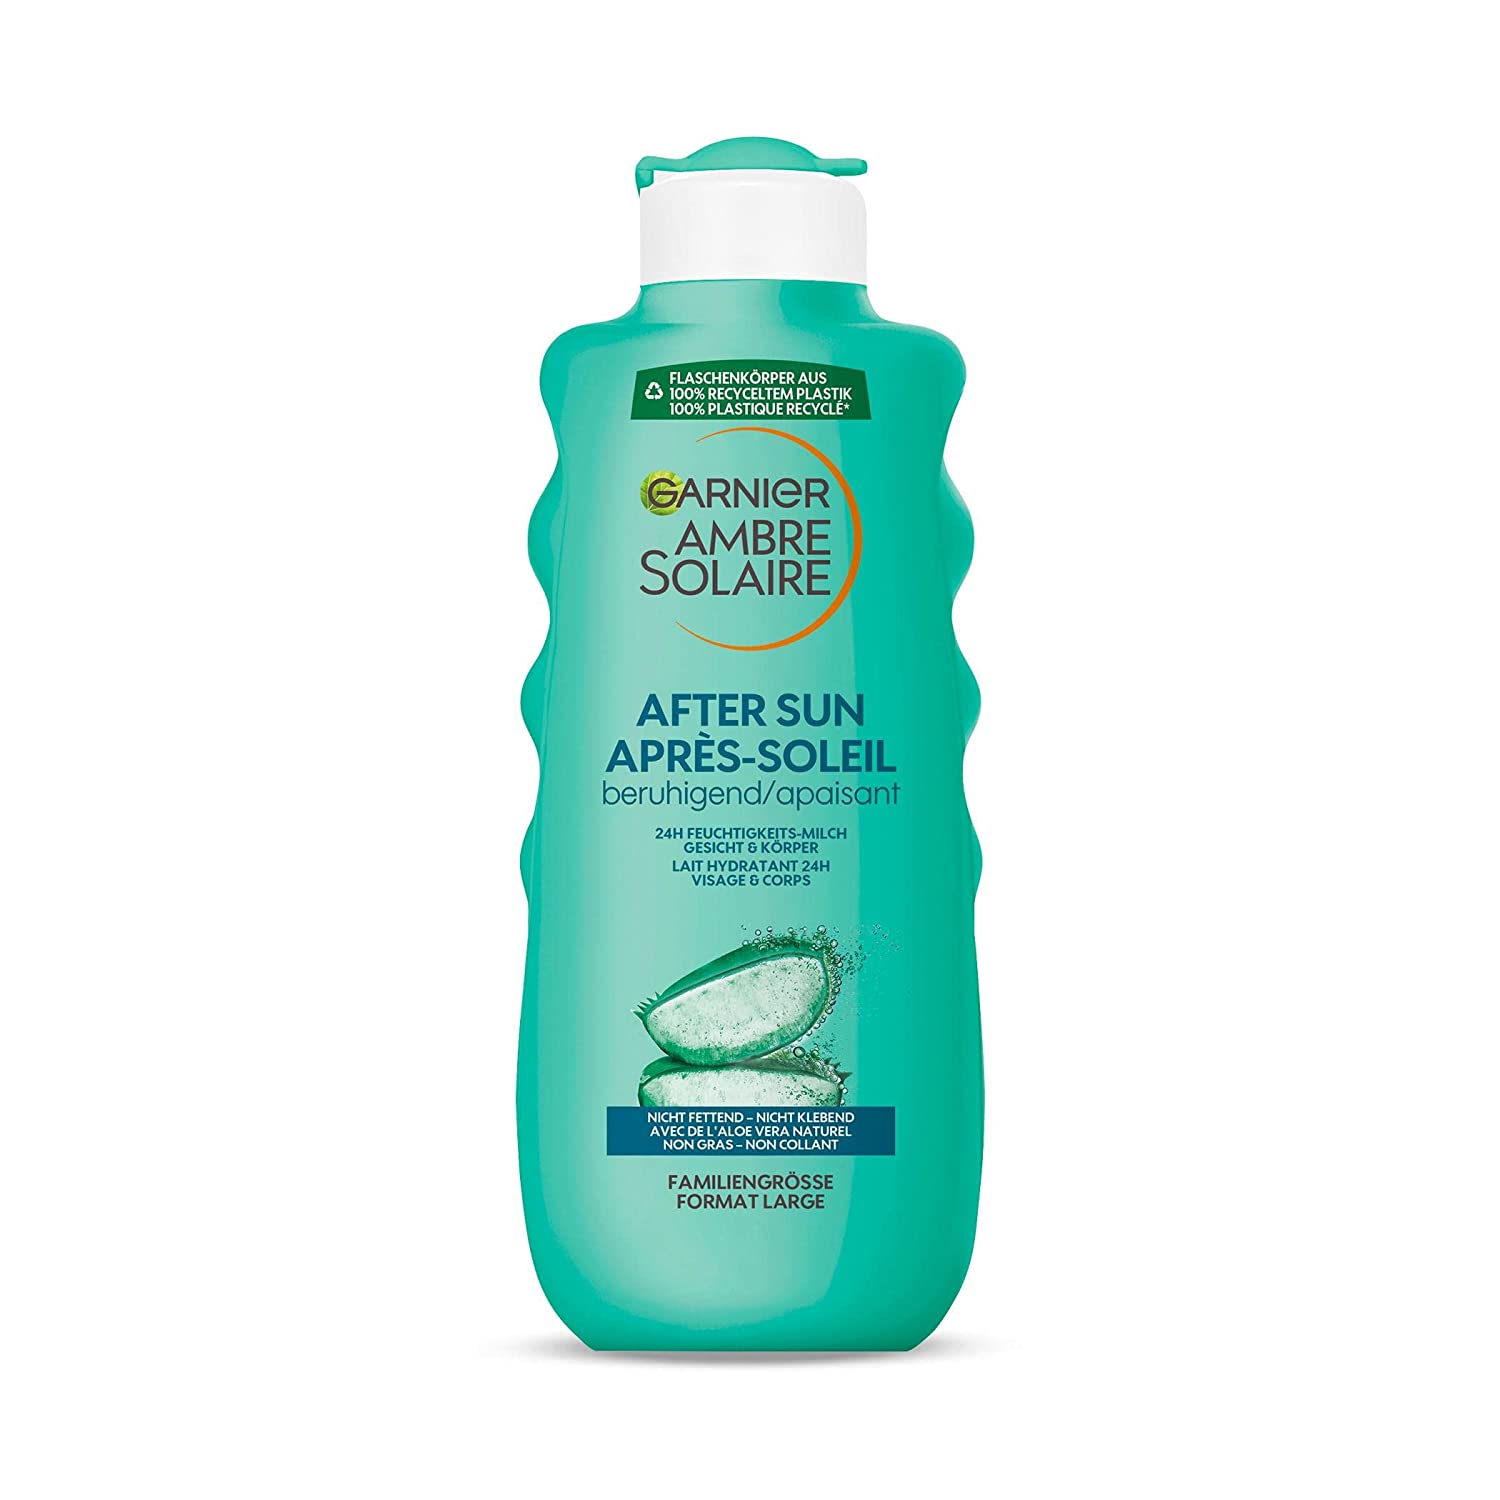 Garnier Ambre Solaire After Sun Soothing Moisturising Milk, Soothes and Cools After Sunbath, with Aloe Vera, 400 ml